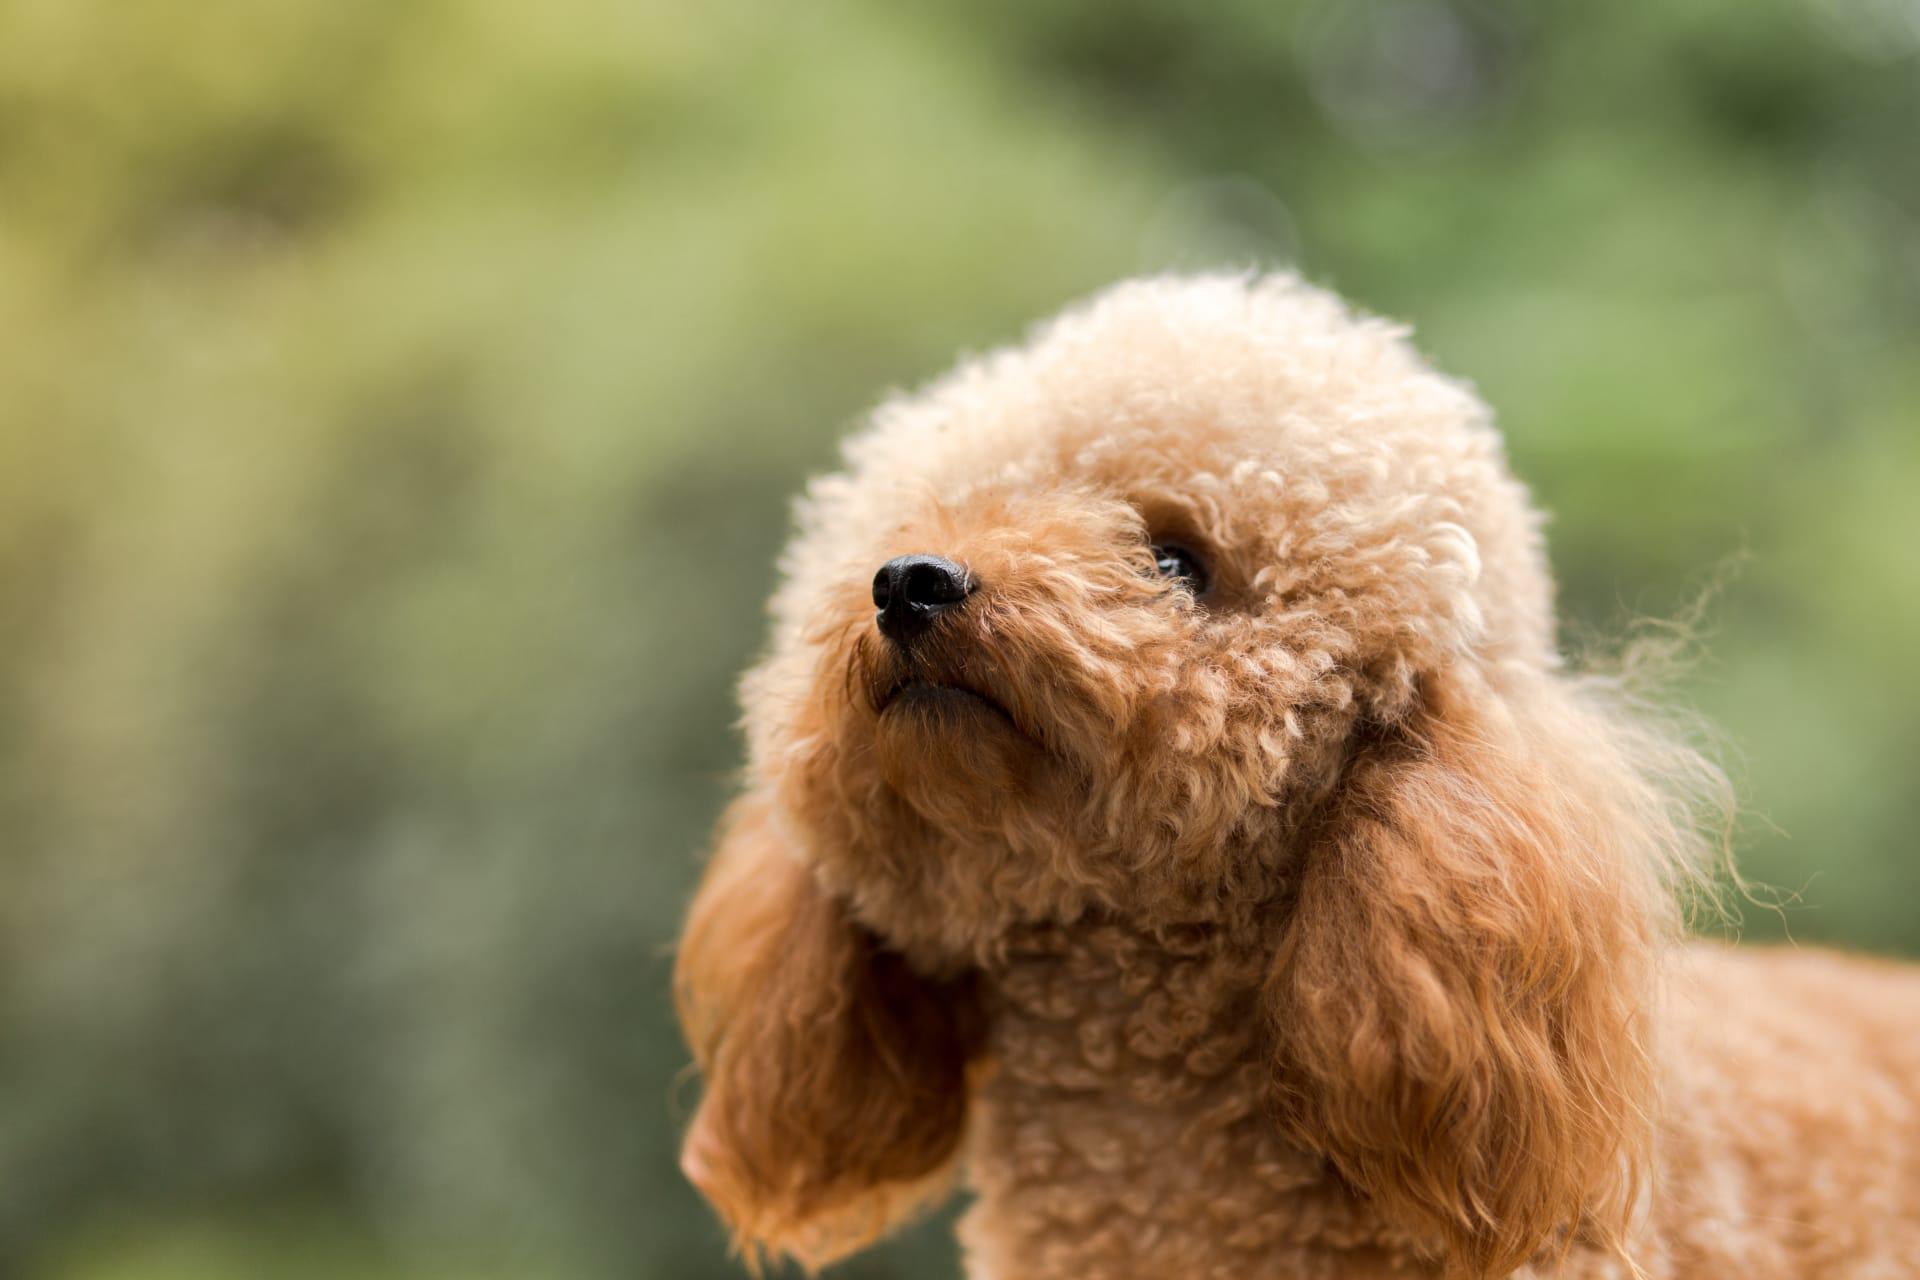 Toy poodle pictures